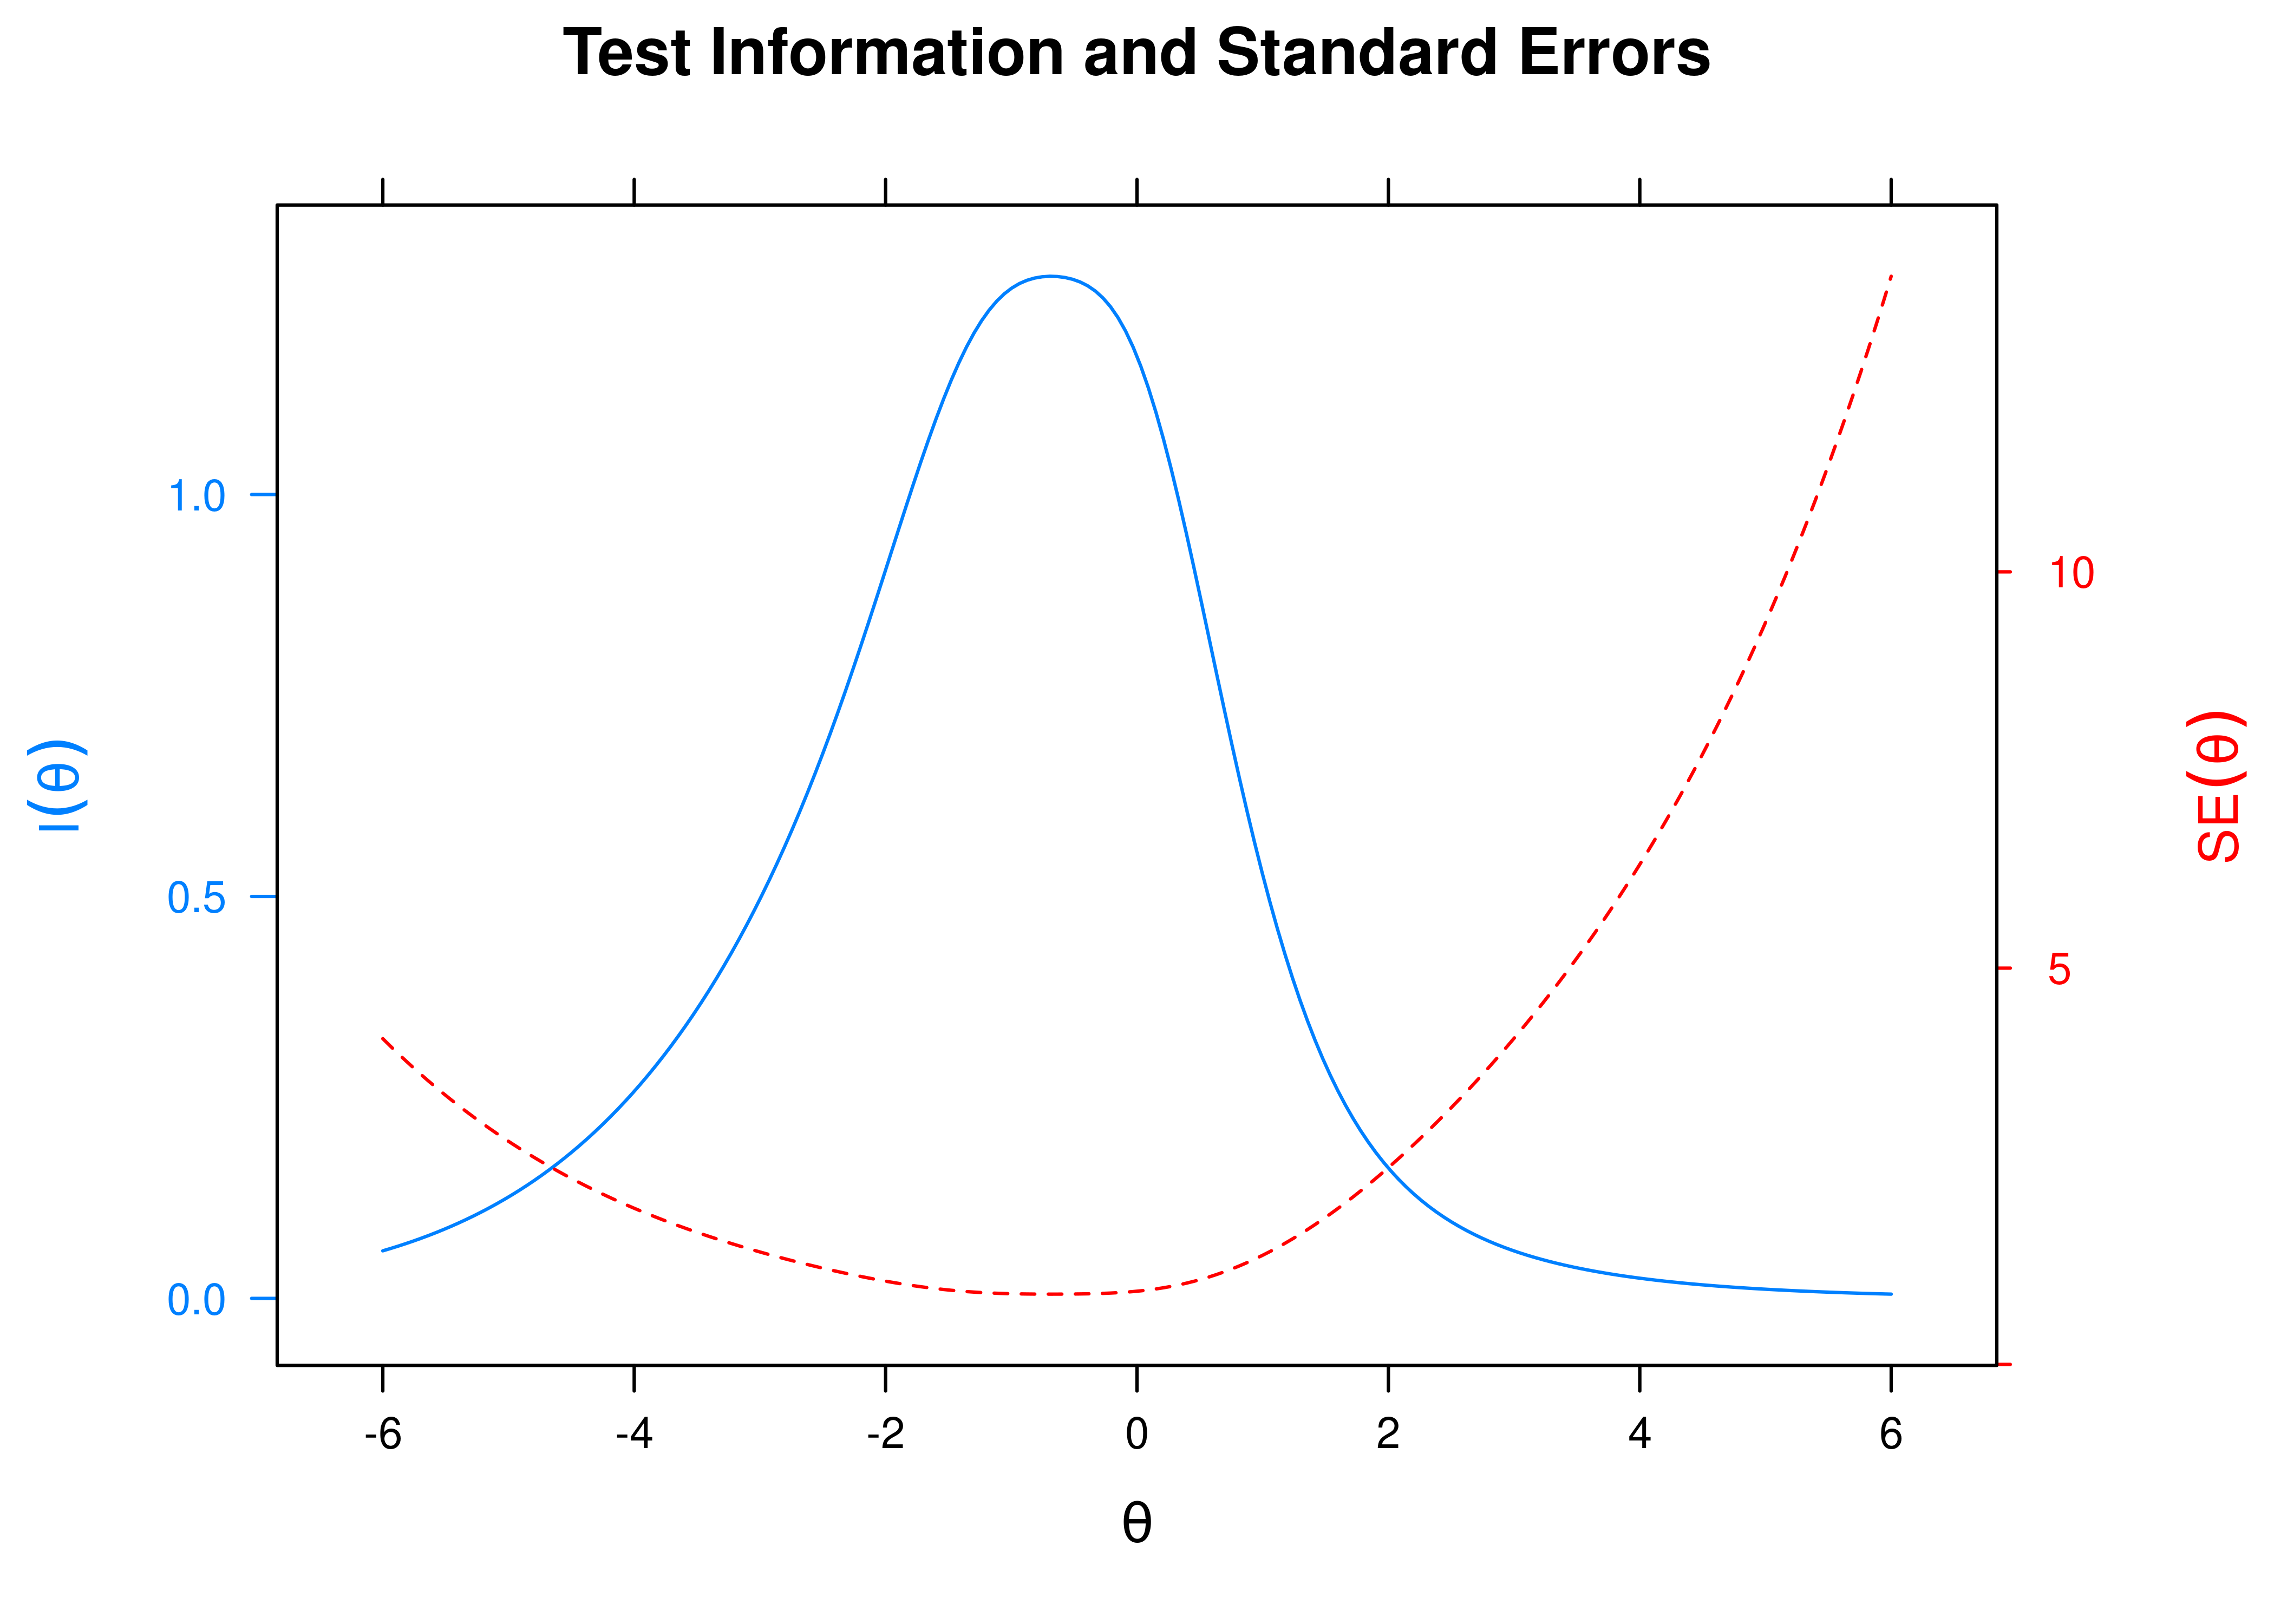 Test Information Curve and Standard Error of Measurement From Three-Parameter Logistic Item Response Theory Model.